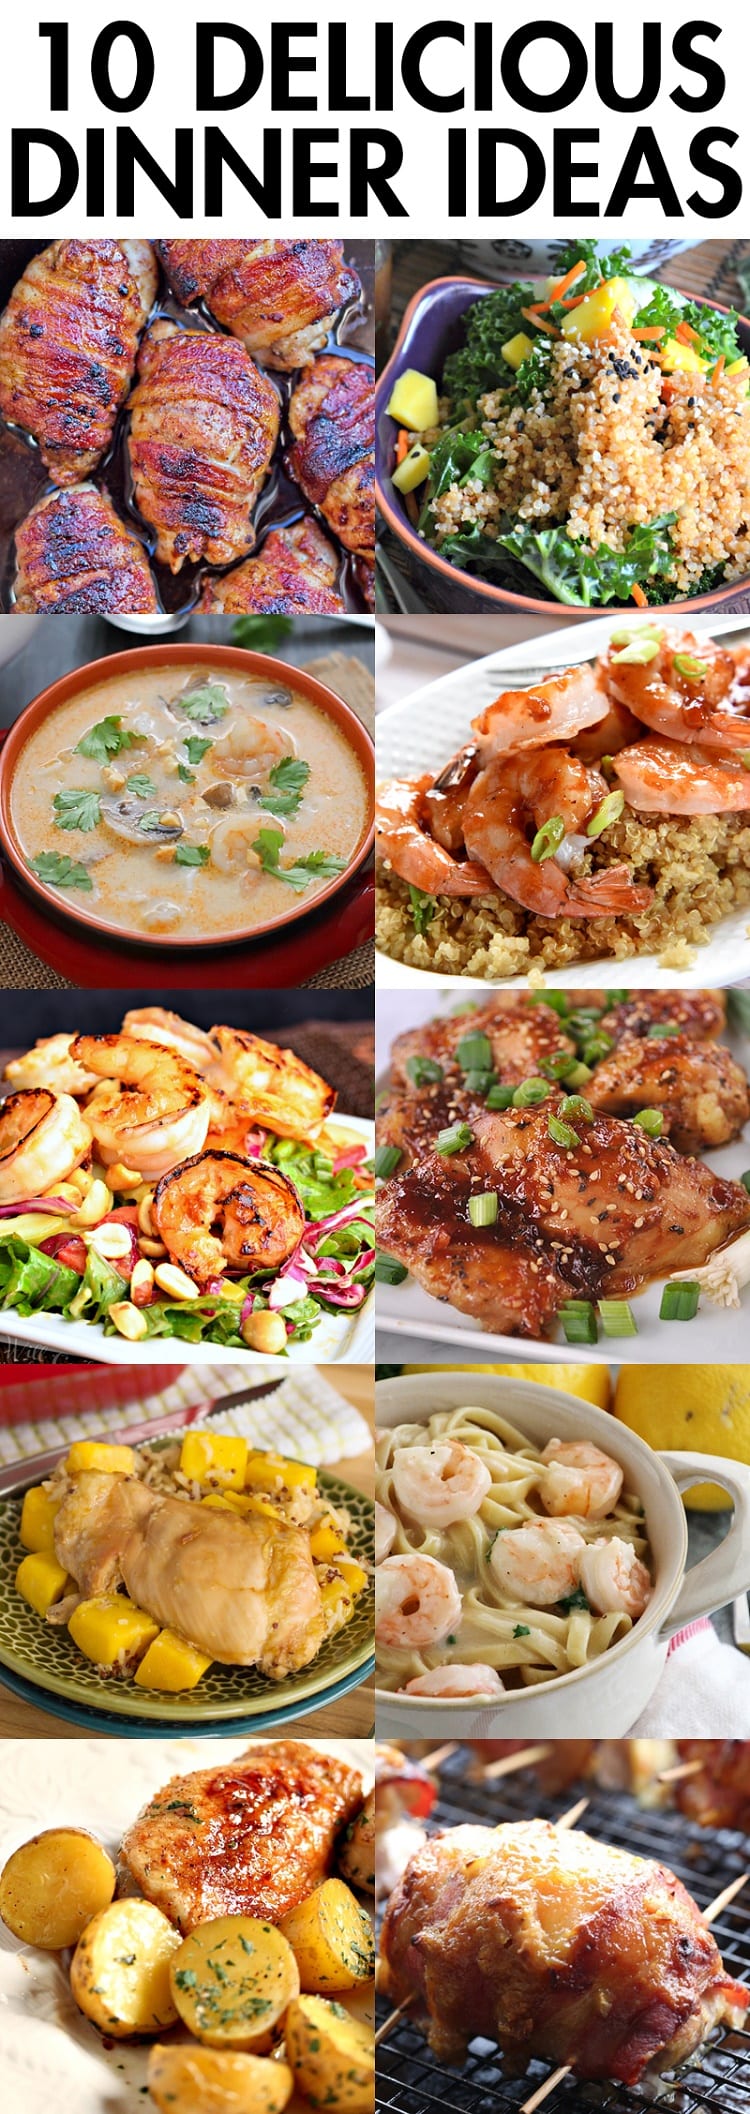 Dinner ideas in a collage 